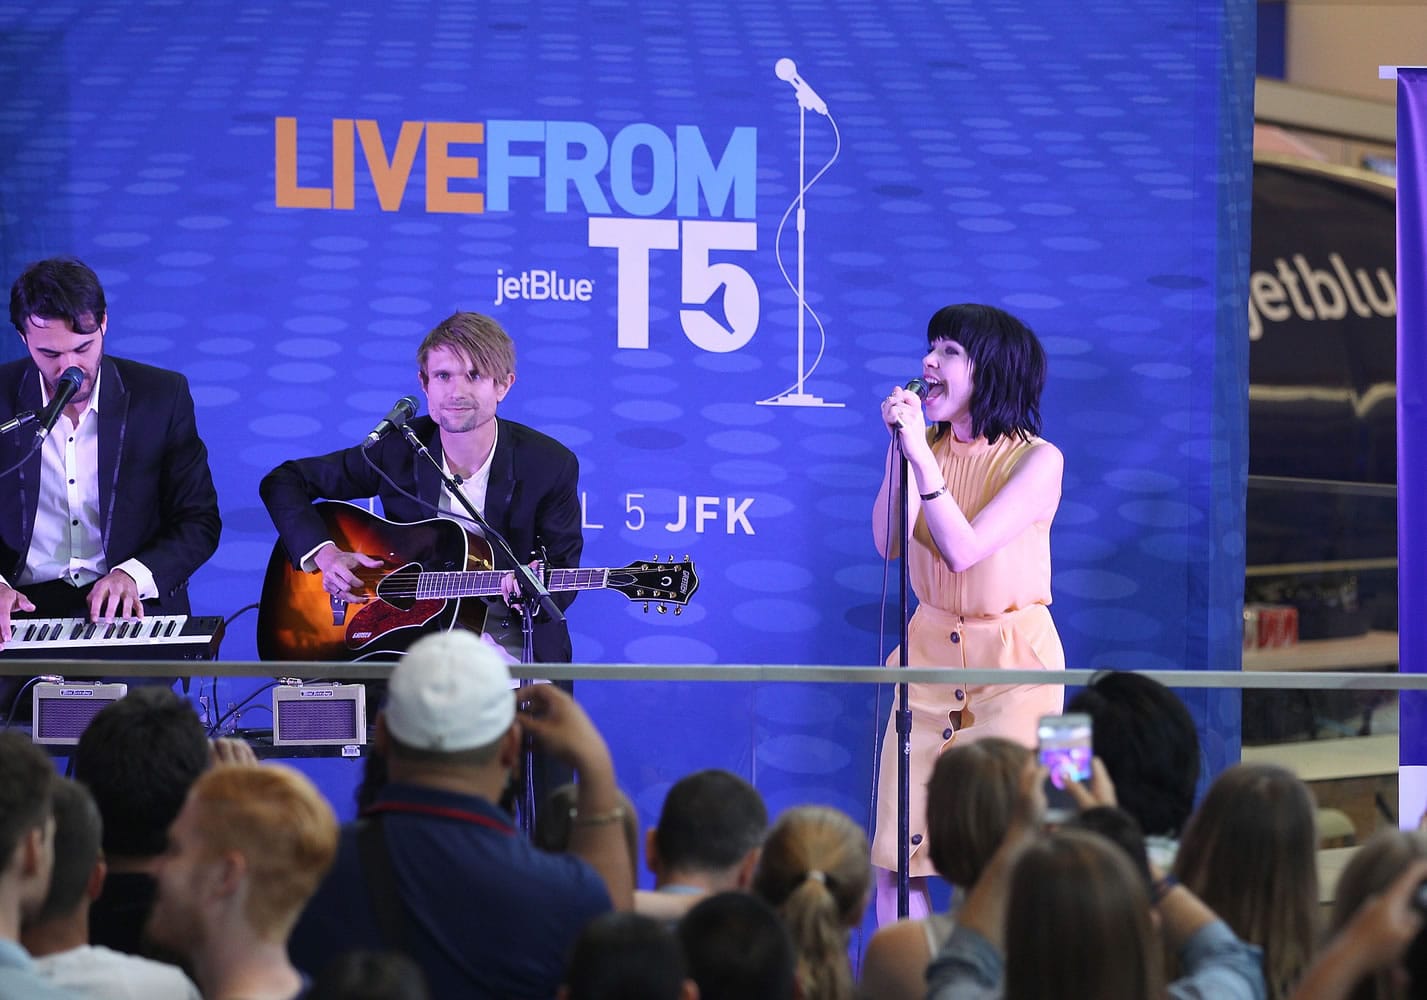 Singer Carly Rae Jepsen, right, performs songs Thursday from her new album, &quot;Emotion,&quot; live from JetBlue's Terminal 5 in New York.